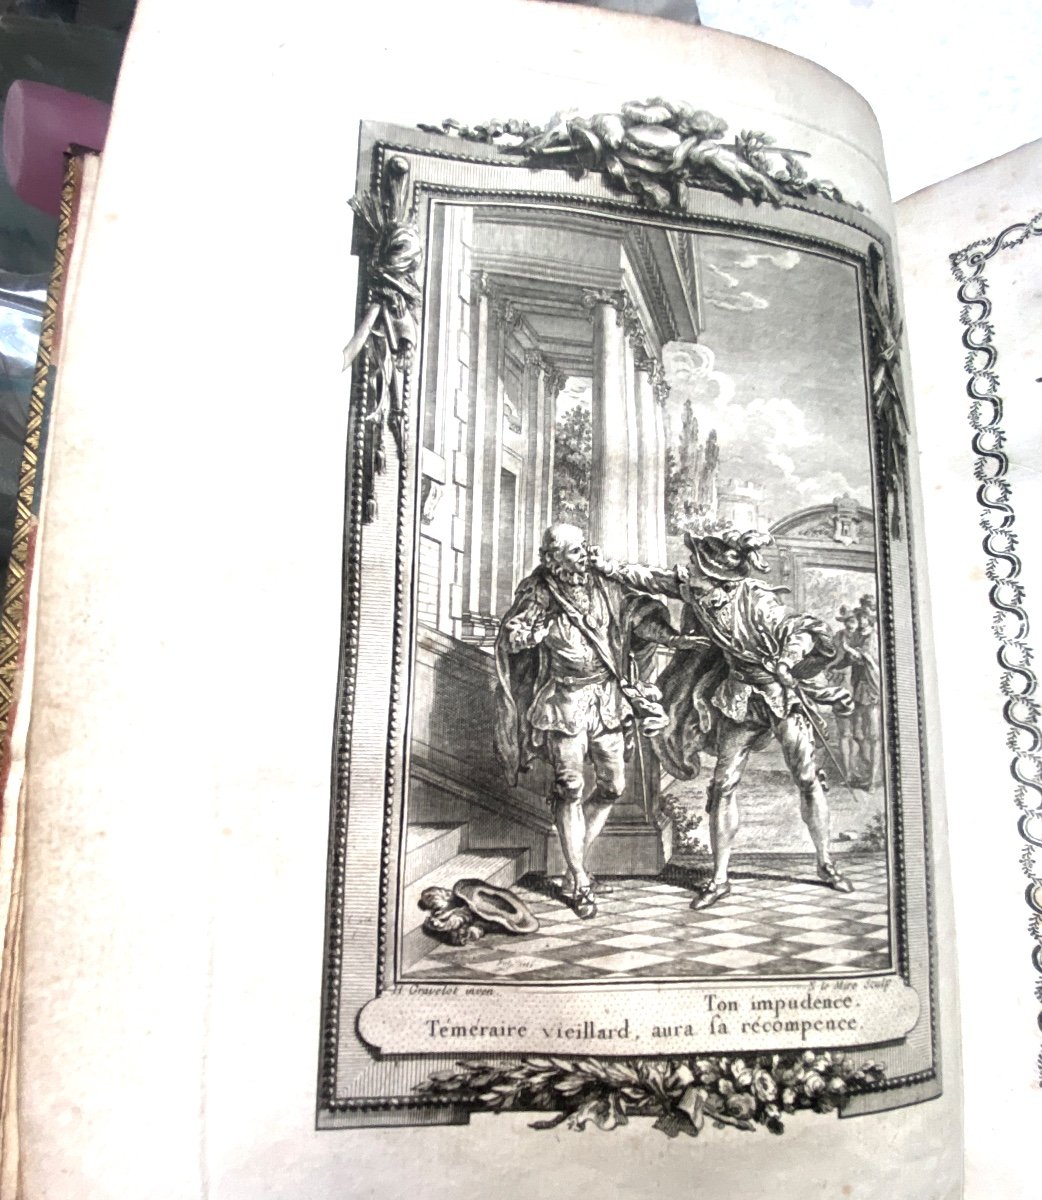 Splendid Edition Of The Theater By P. Corneille In 8 Volumes In 4 In Illustrated Tortoiseshell Glazed Calfskin -photo-3